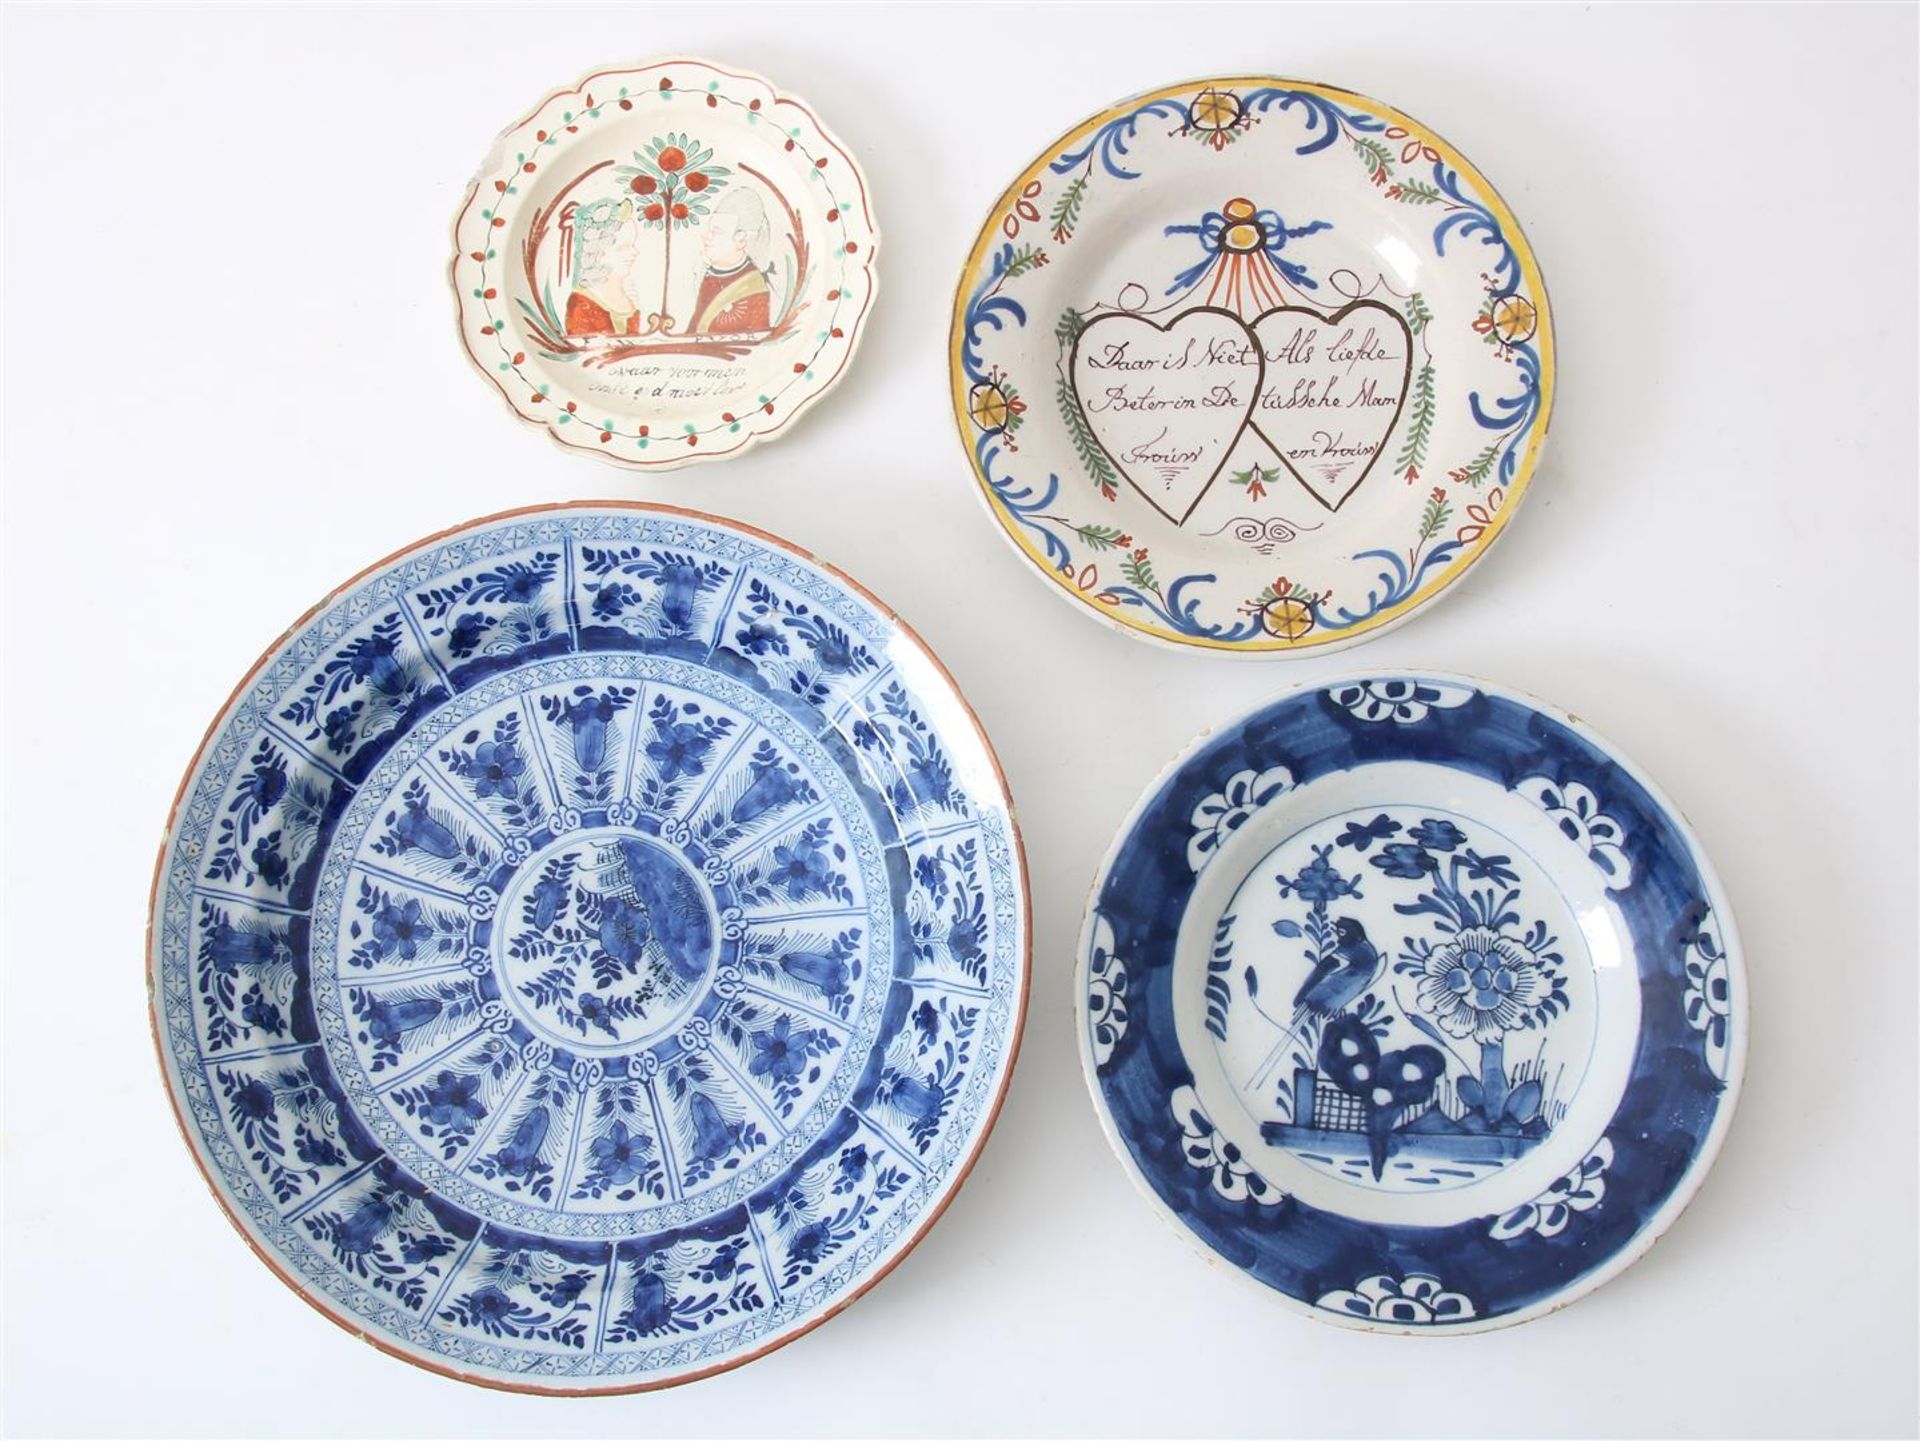 Lot consisting of: plate with polychrome floral decor and text in two hearts: "There is nothing